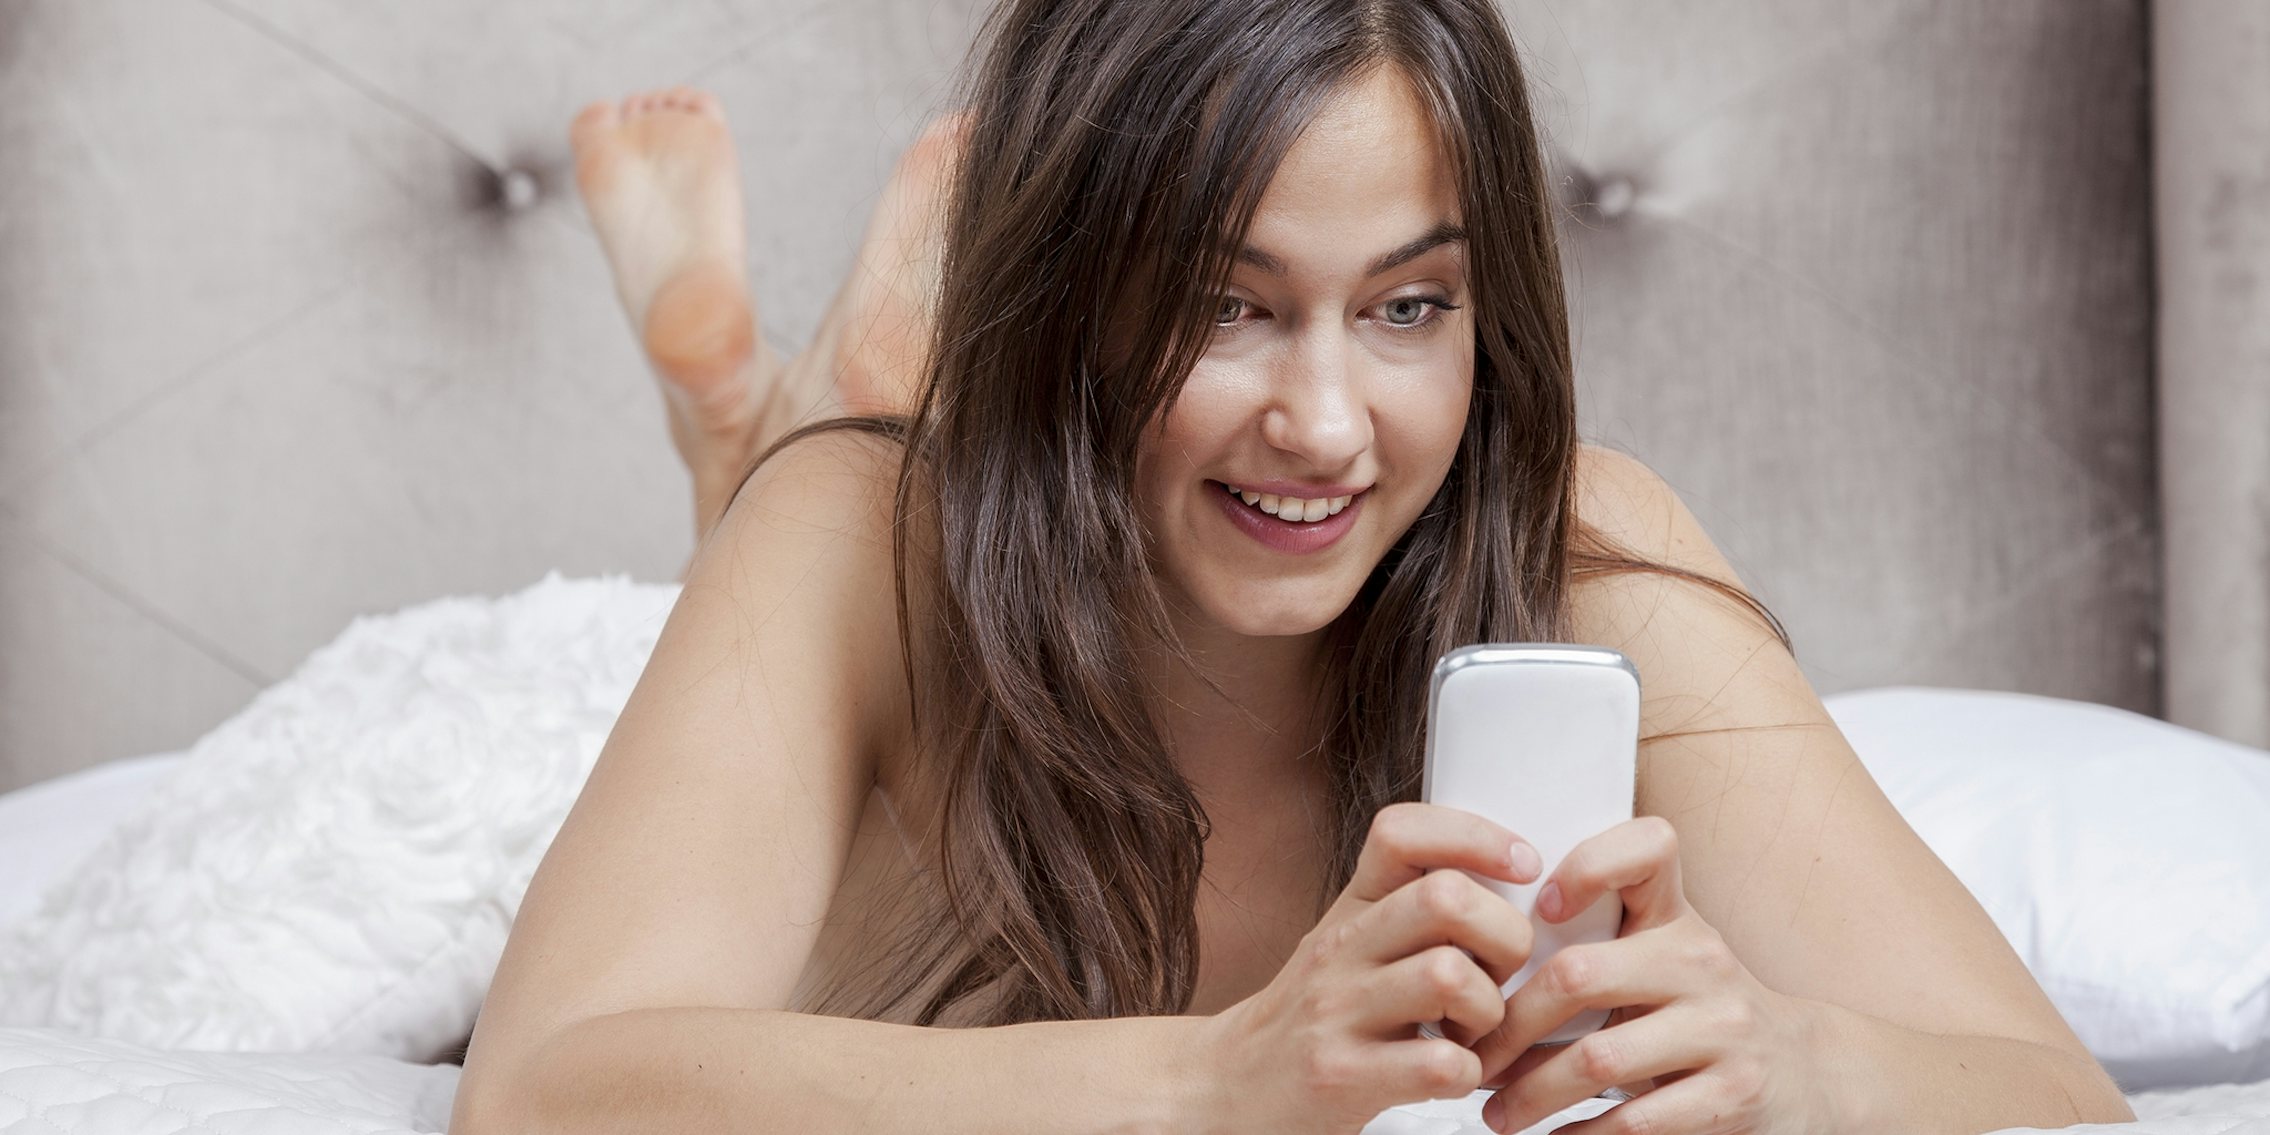 How to Watch Porn on Your Smartphone Without Catching a Virus